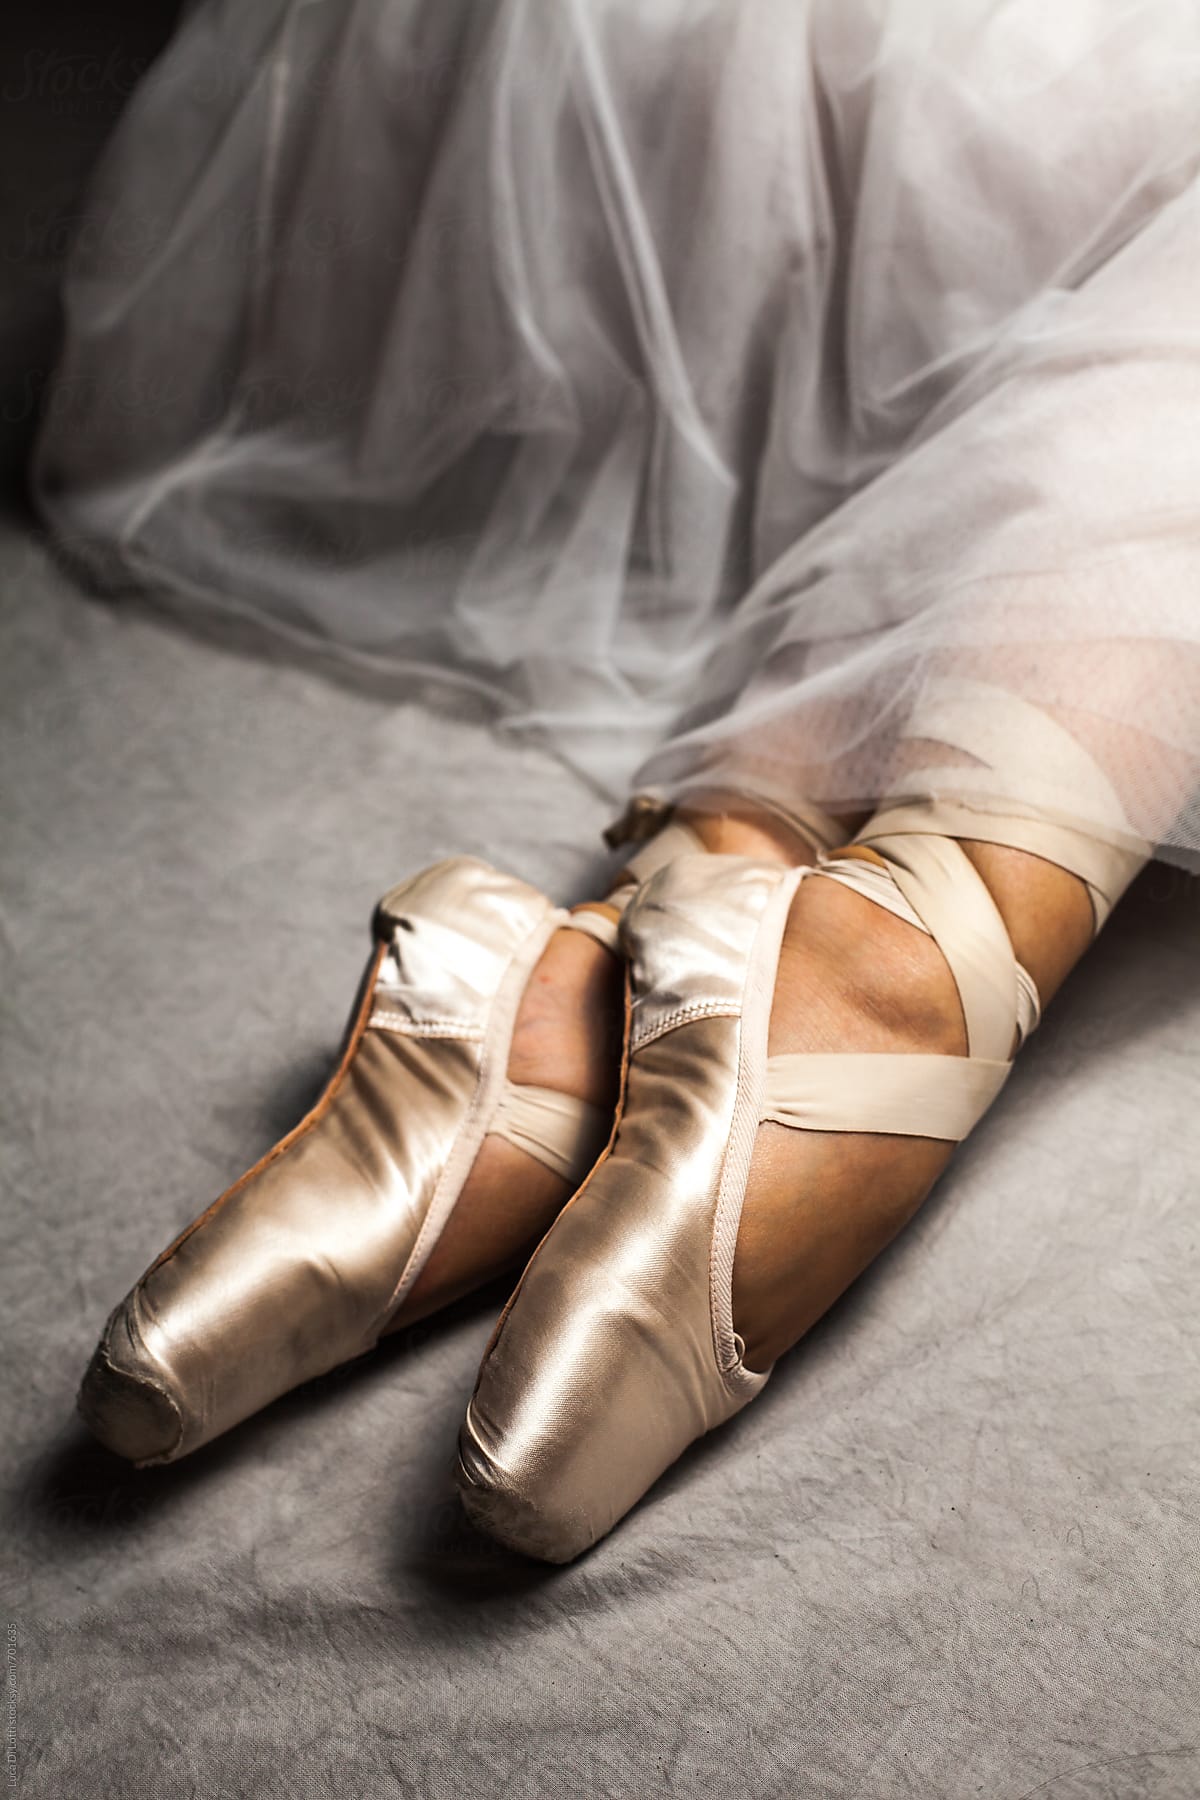 Golden Pointe shoes